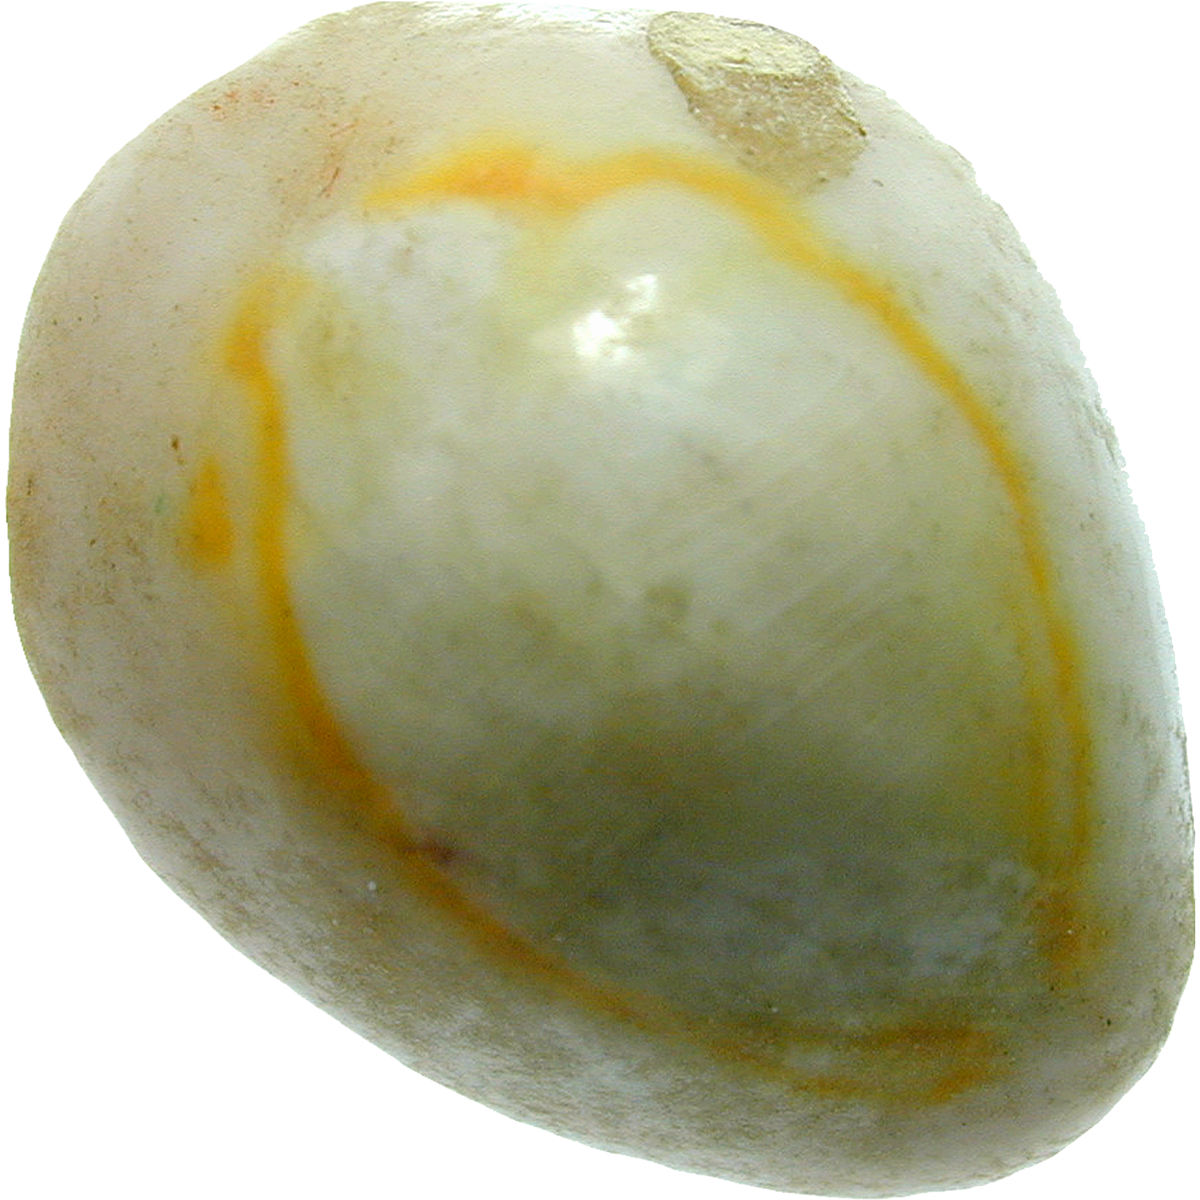 Africa to Asia, Cowrie Shell Cypraea annulus (reverse)